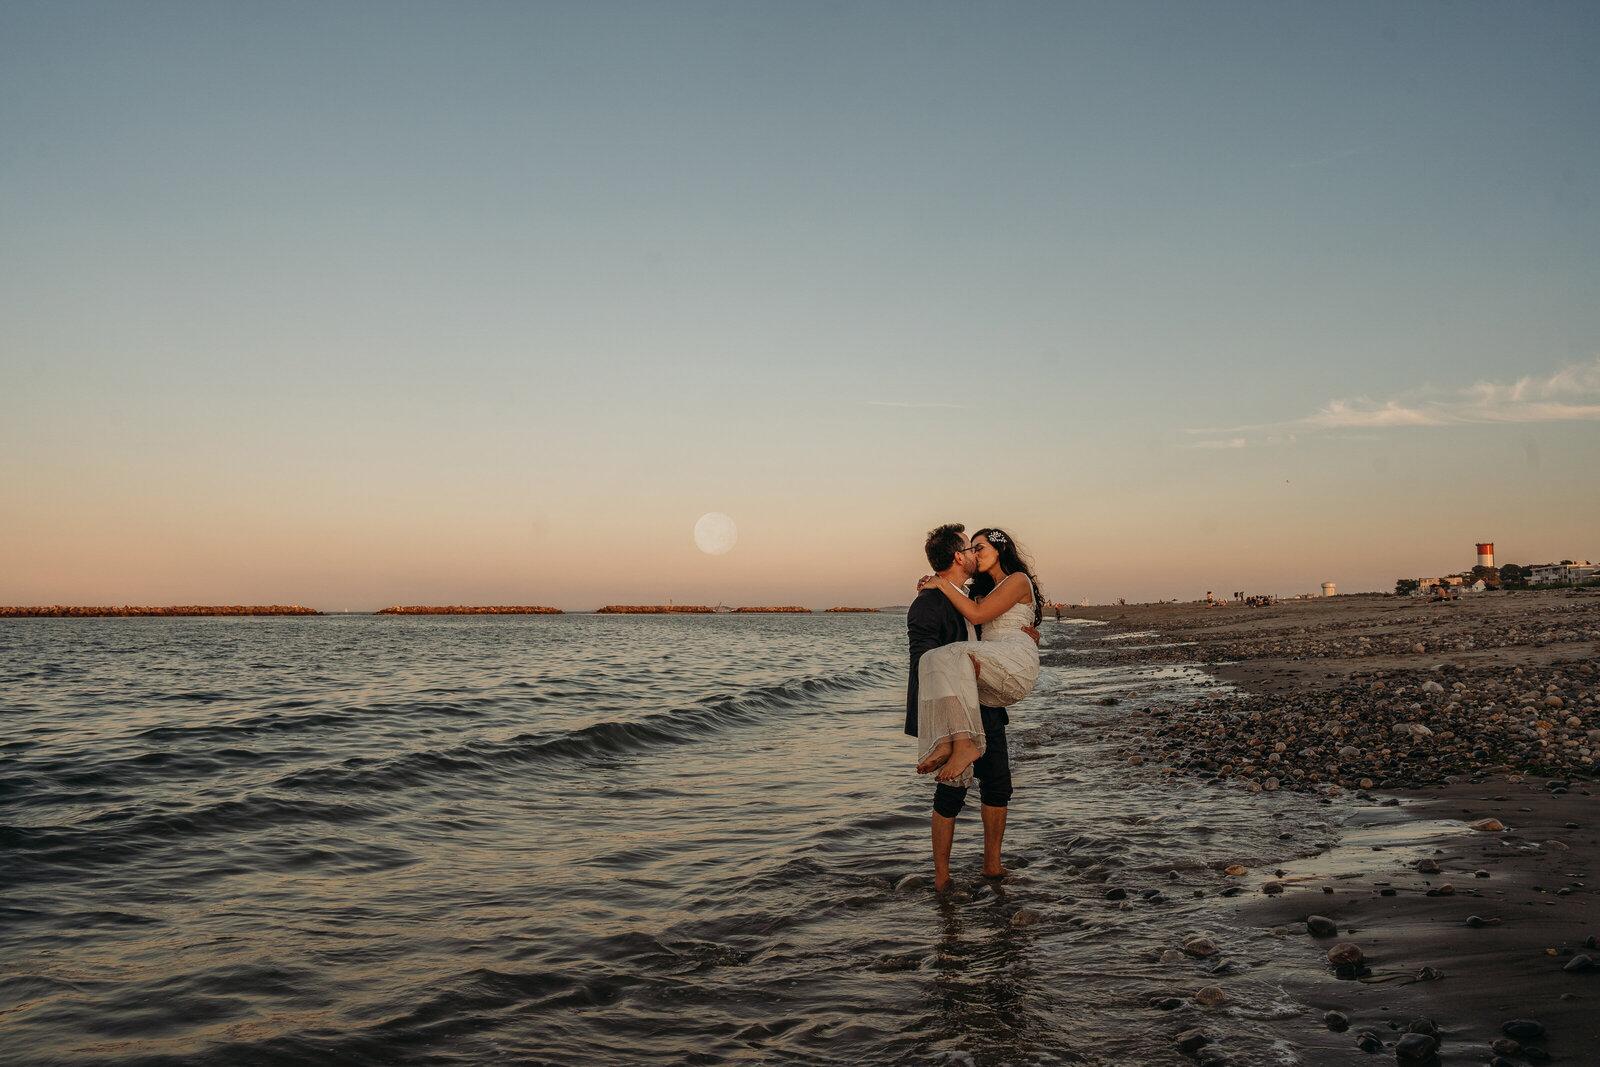 man picks up woman in ocean with moon behind them